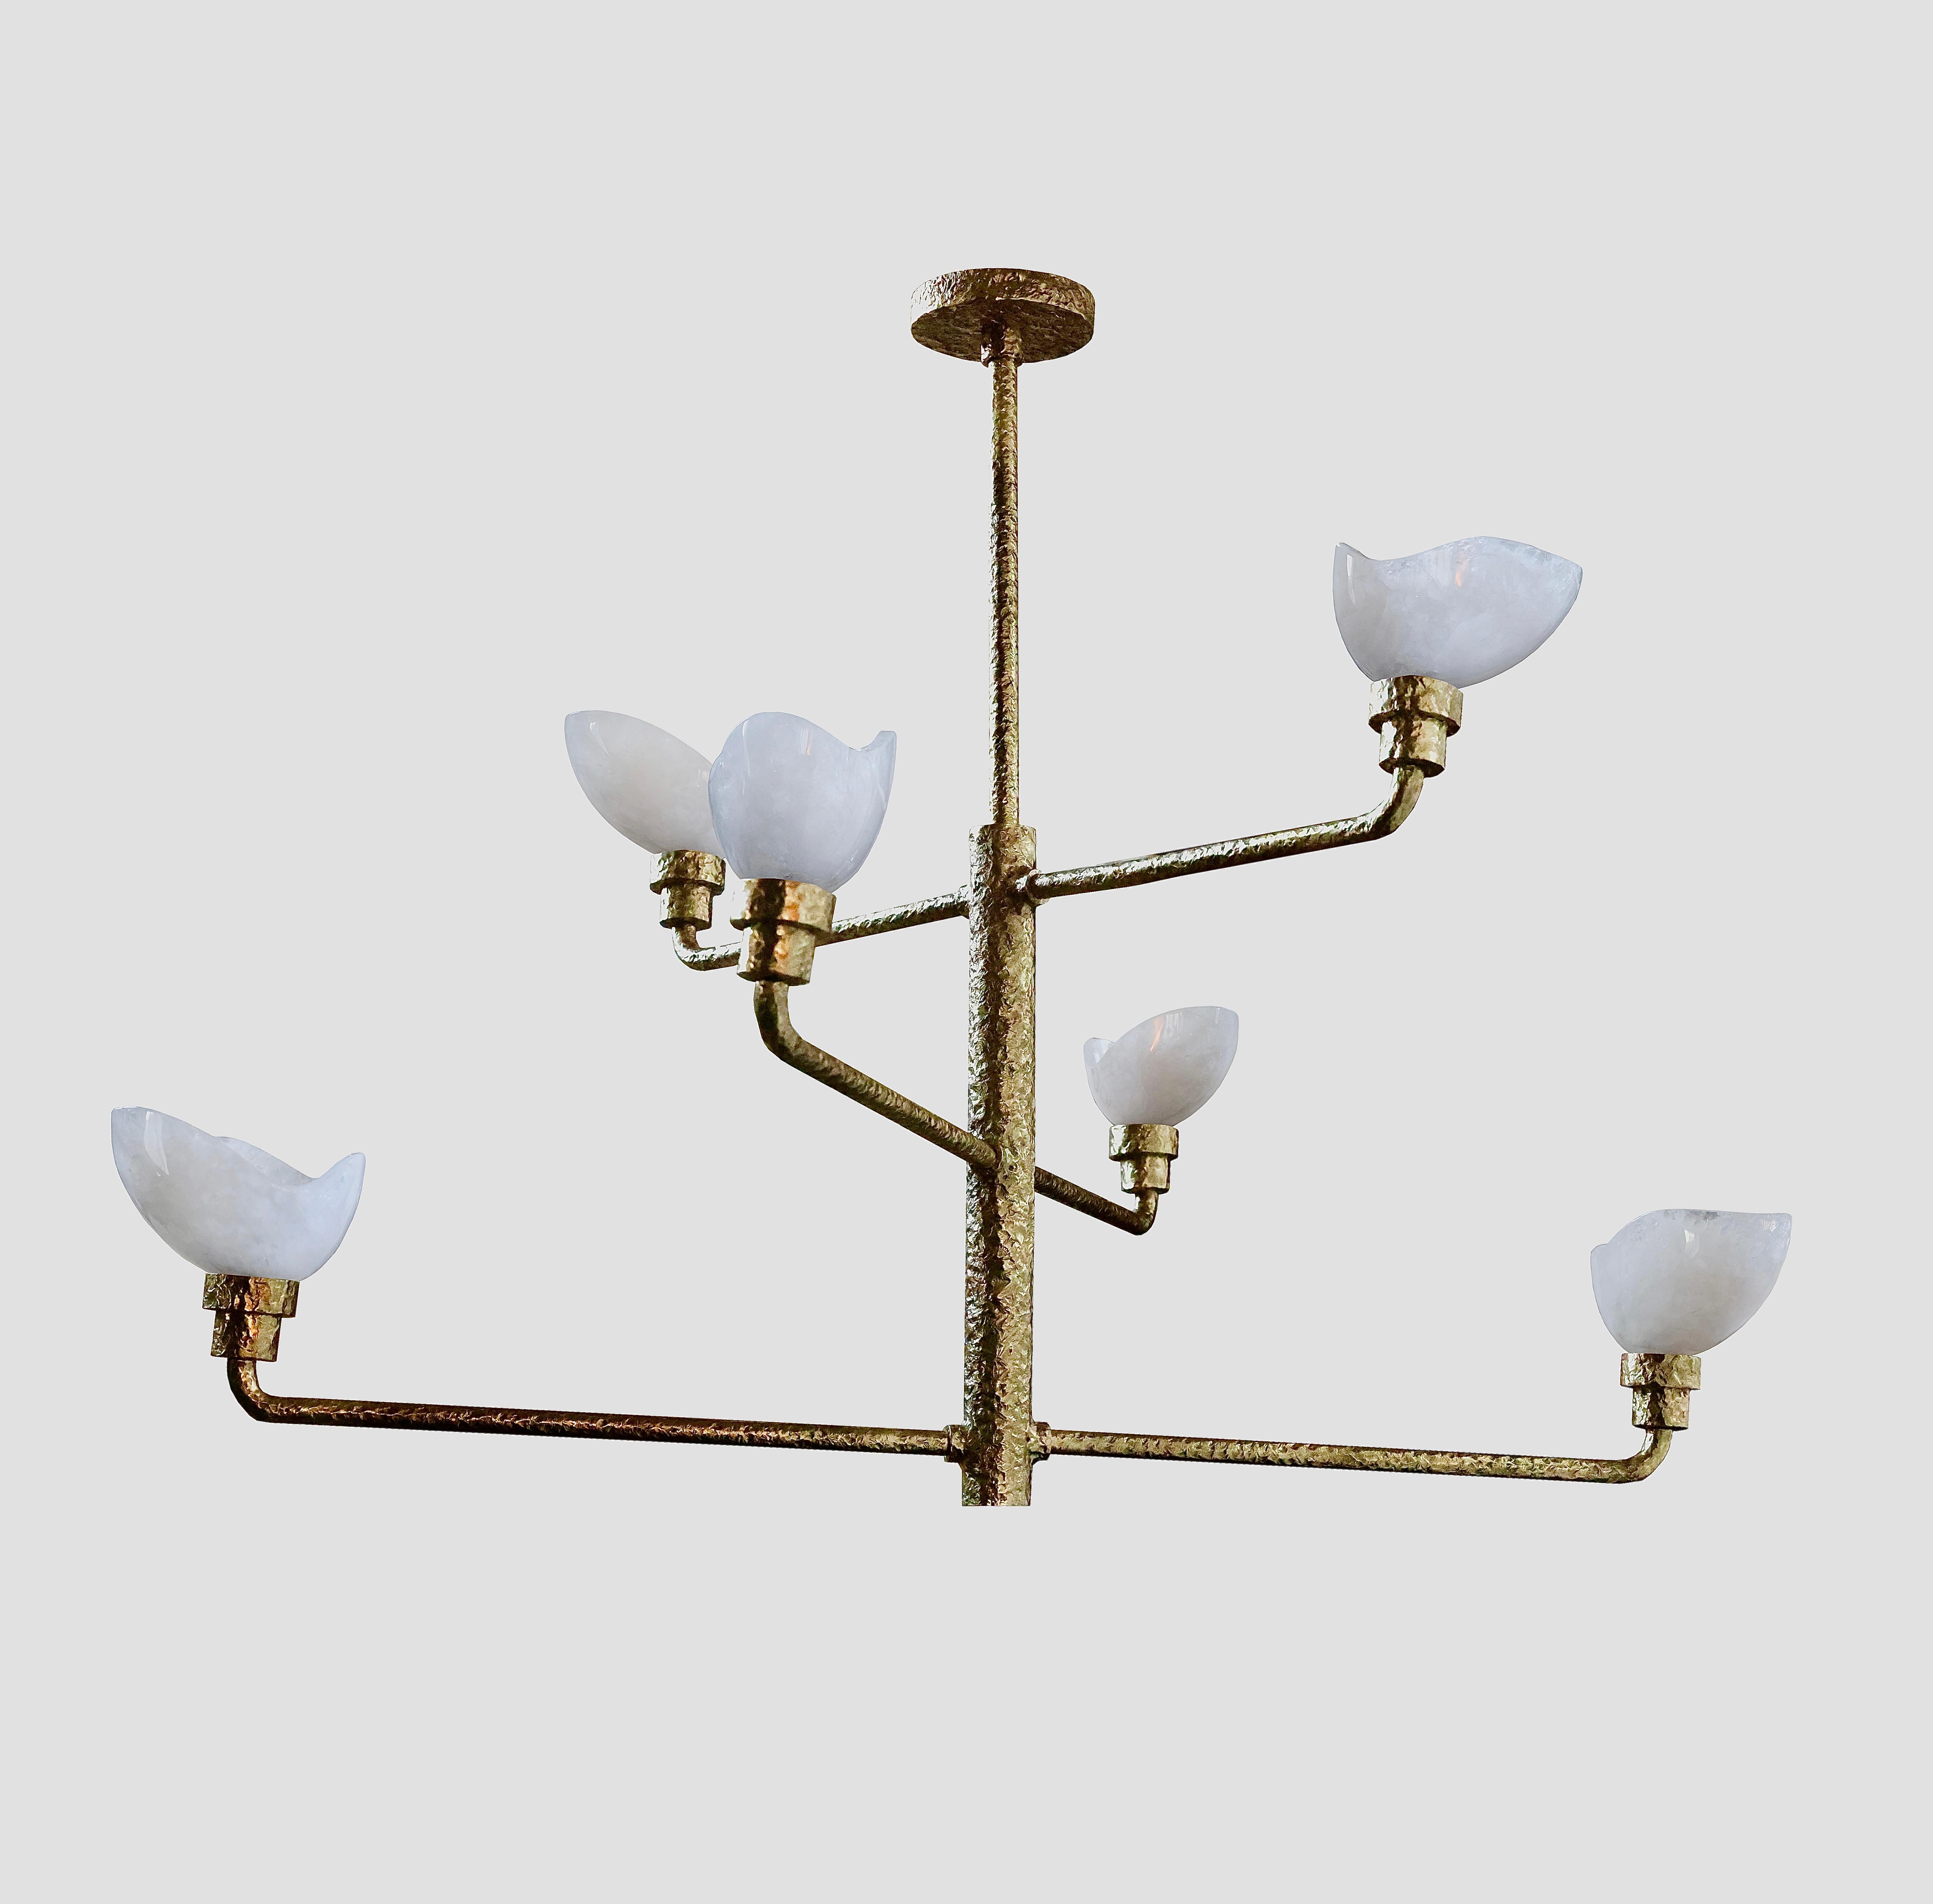 Hammered polished brass frame with finely carved rock crystal petals.
Created by Phoenix
Available finish:polished nickel,aged brass and plaster 
Six E12 sockets installed,600w total 

Custom size upon request.